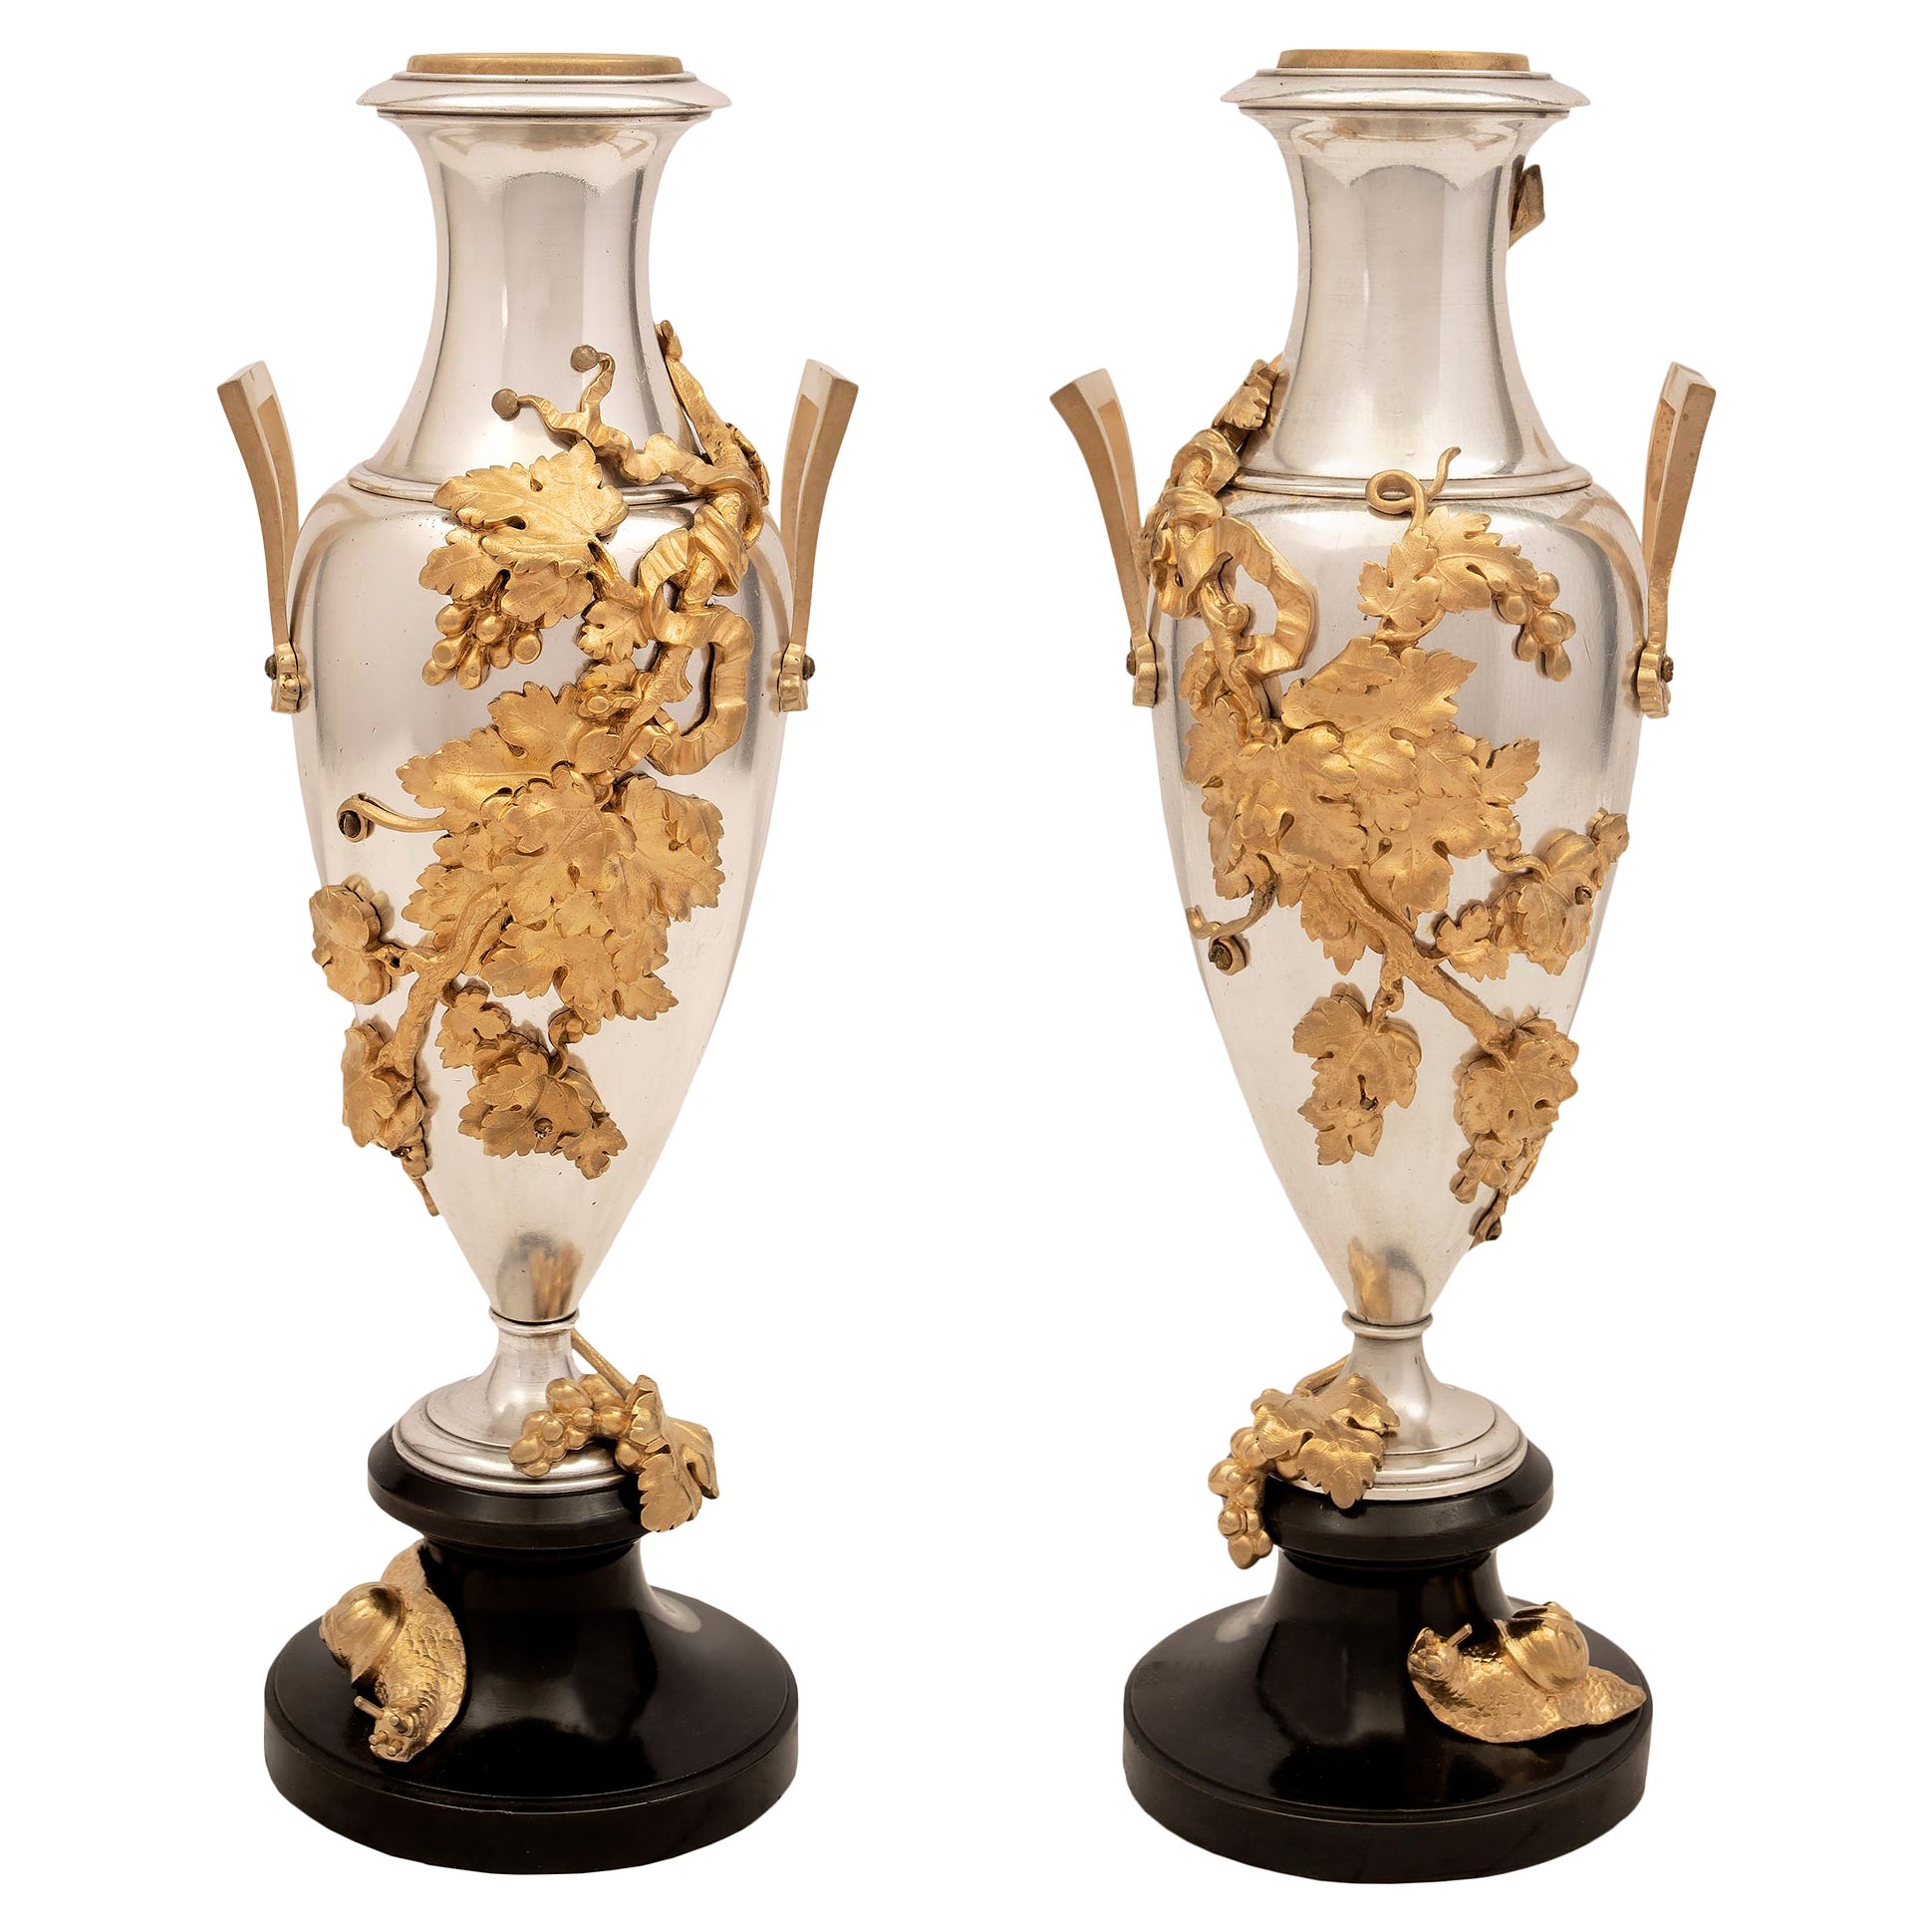 Pair of French 19th Century Louis XVI Style Marble, Bronze and Ormolu Vases